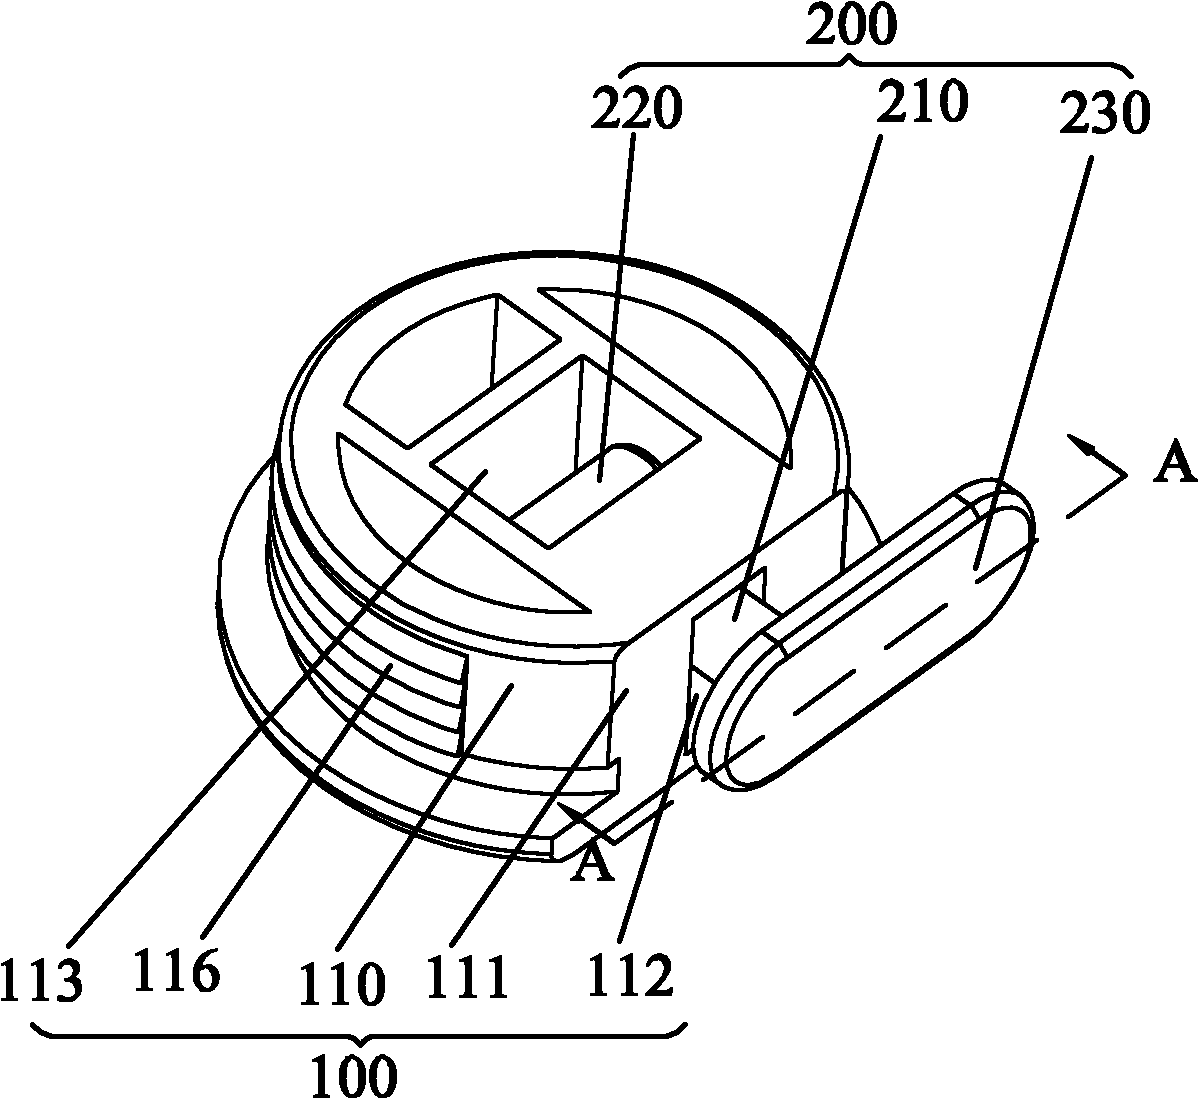 Rotary furniture connecting part